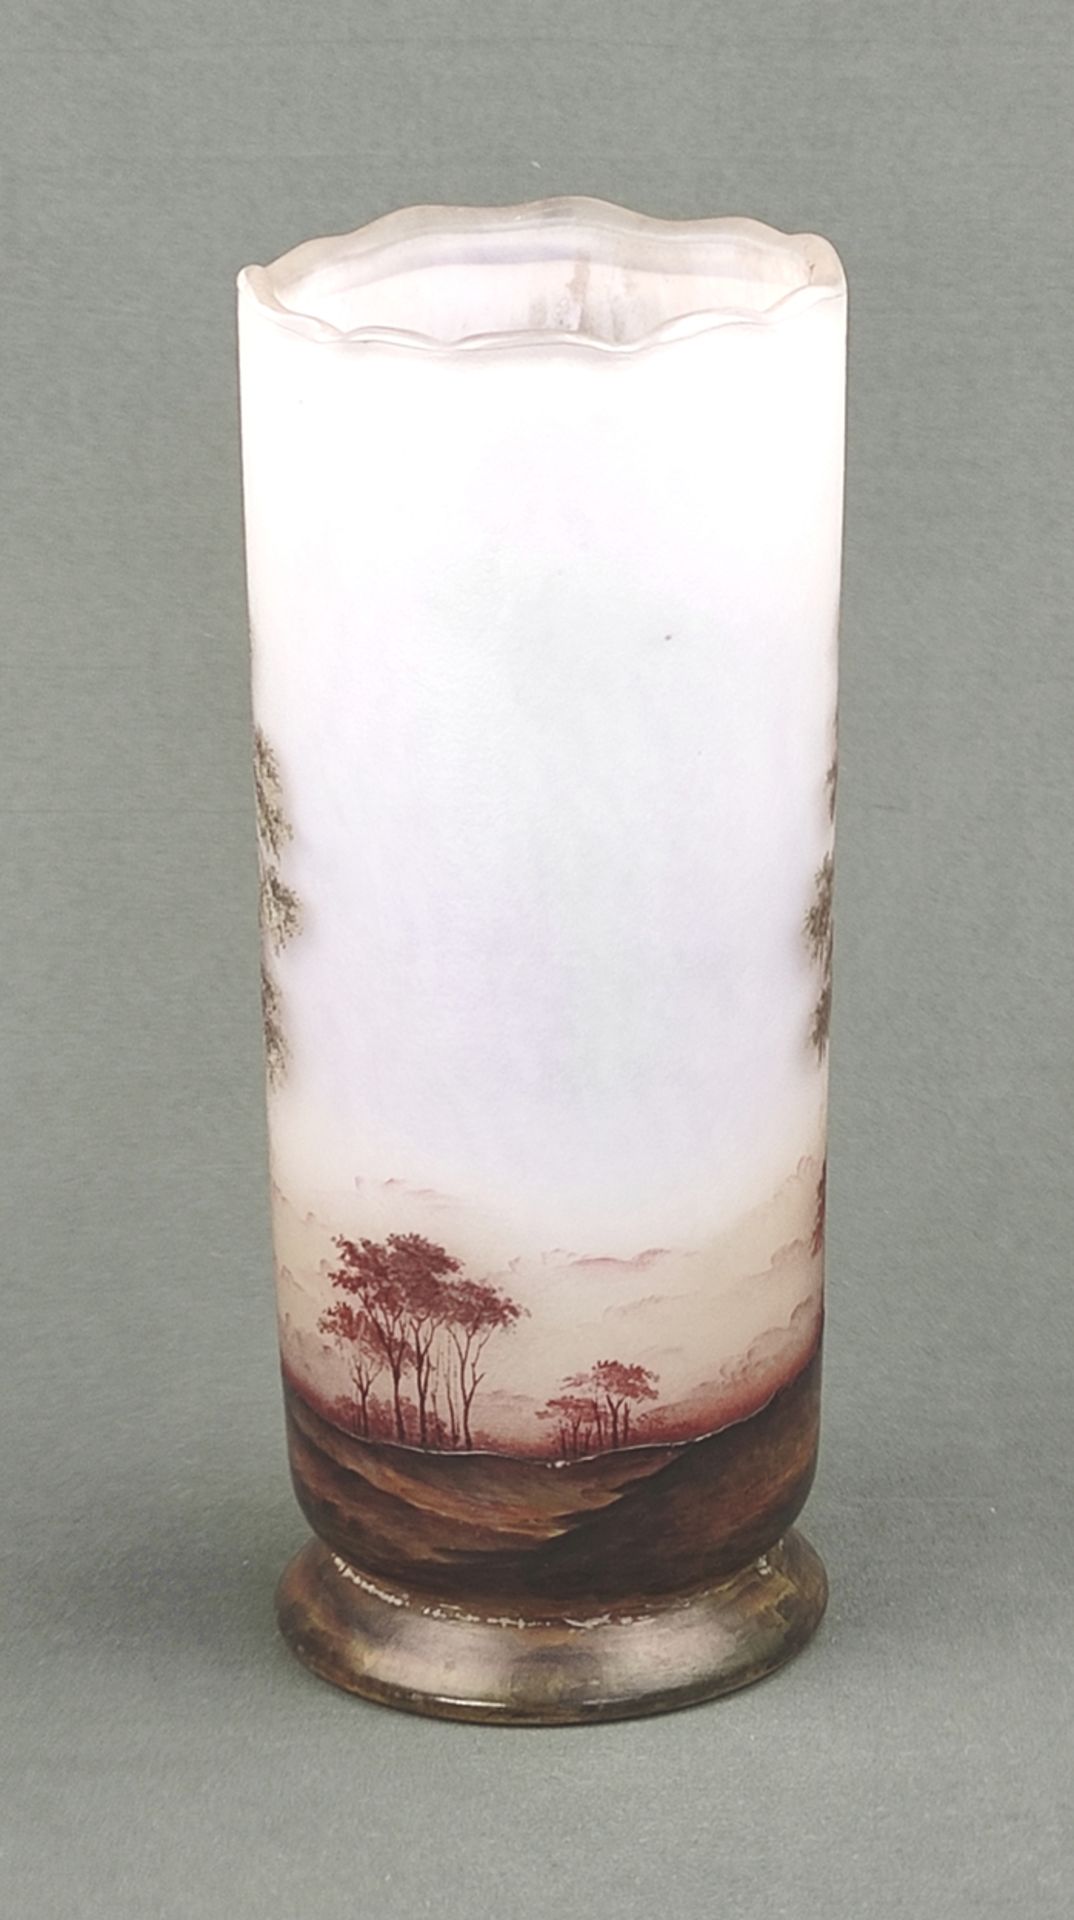 Vase "Paysage Mauve", Daum Frères, Nancy, early 20th century, decorated with sparse birch forest in - Image 2 of 3